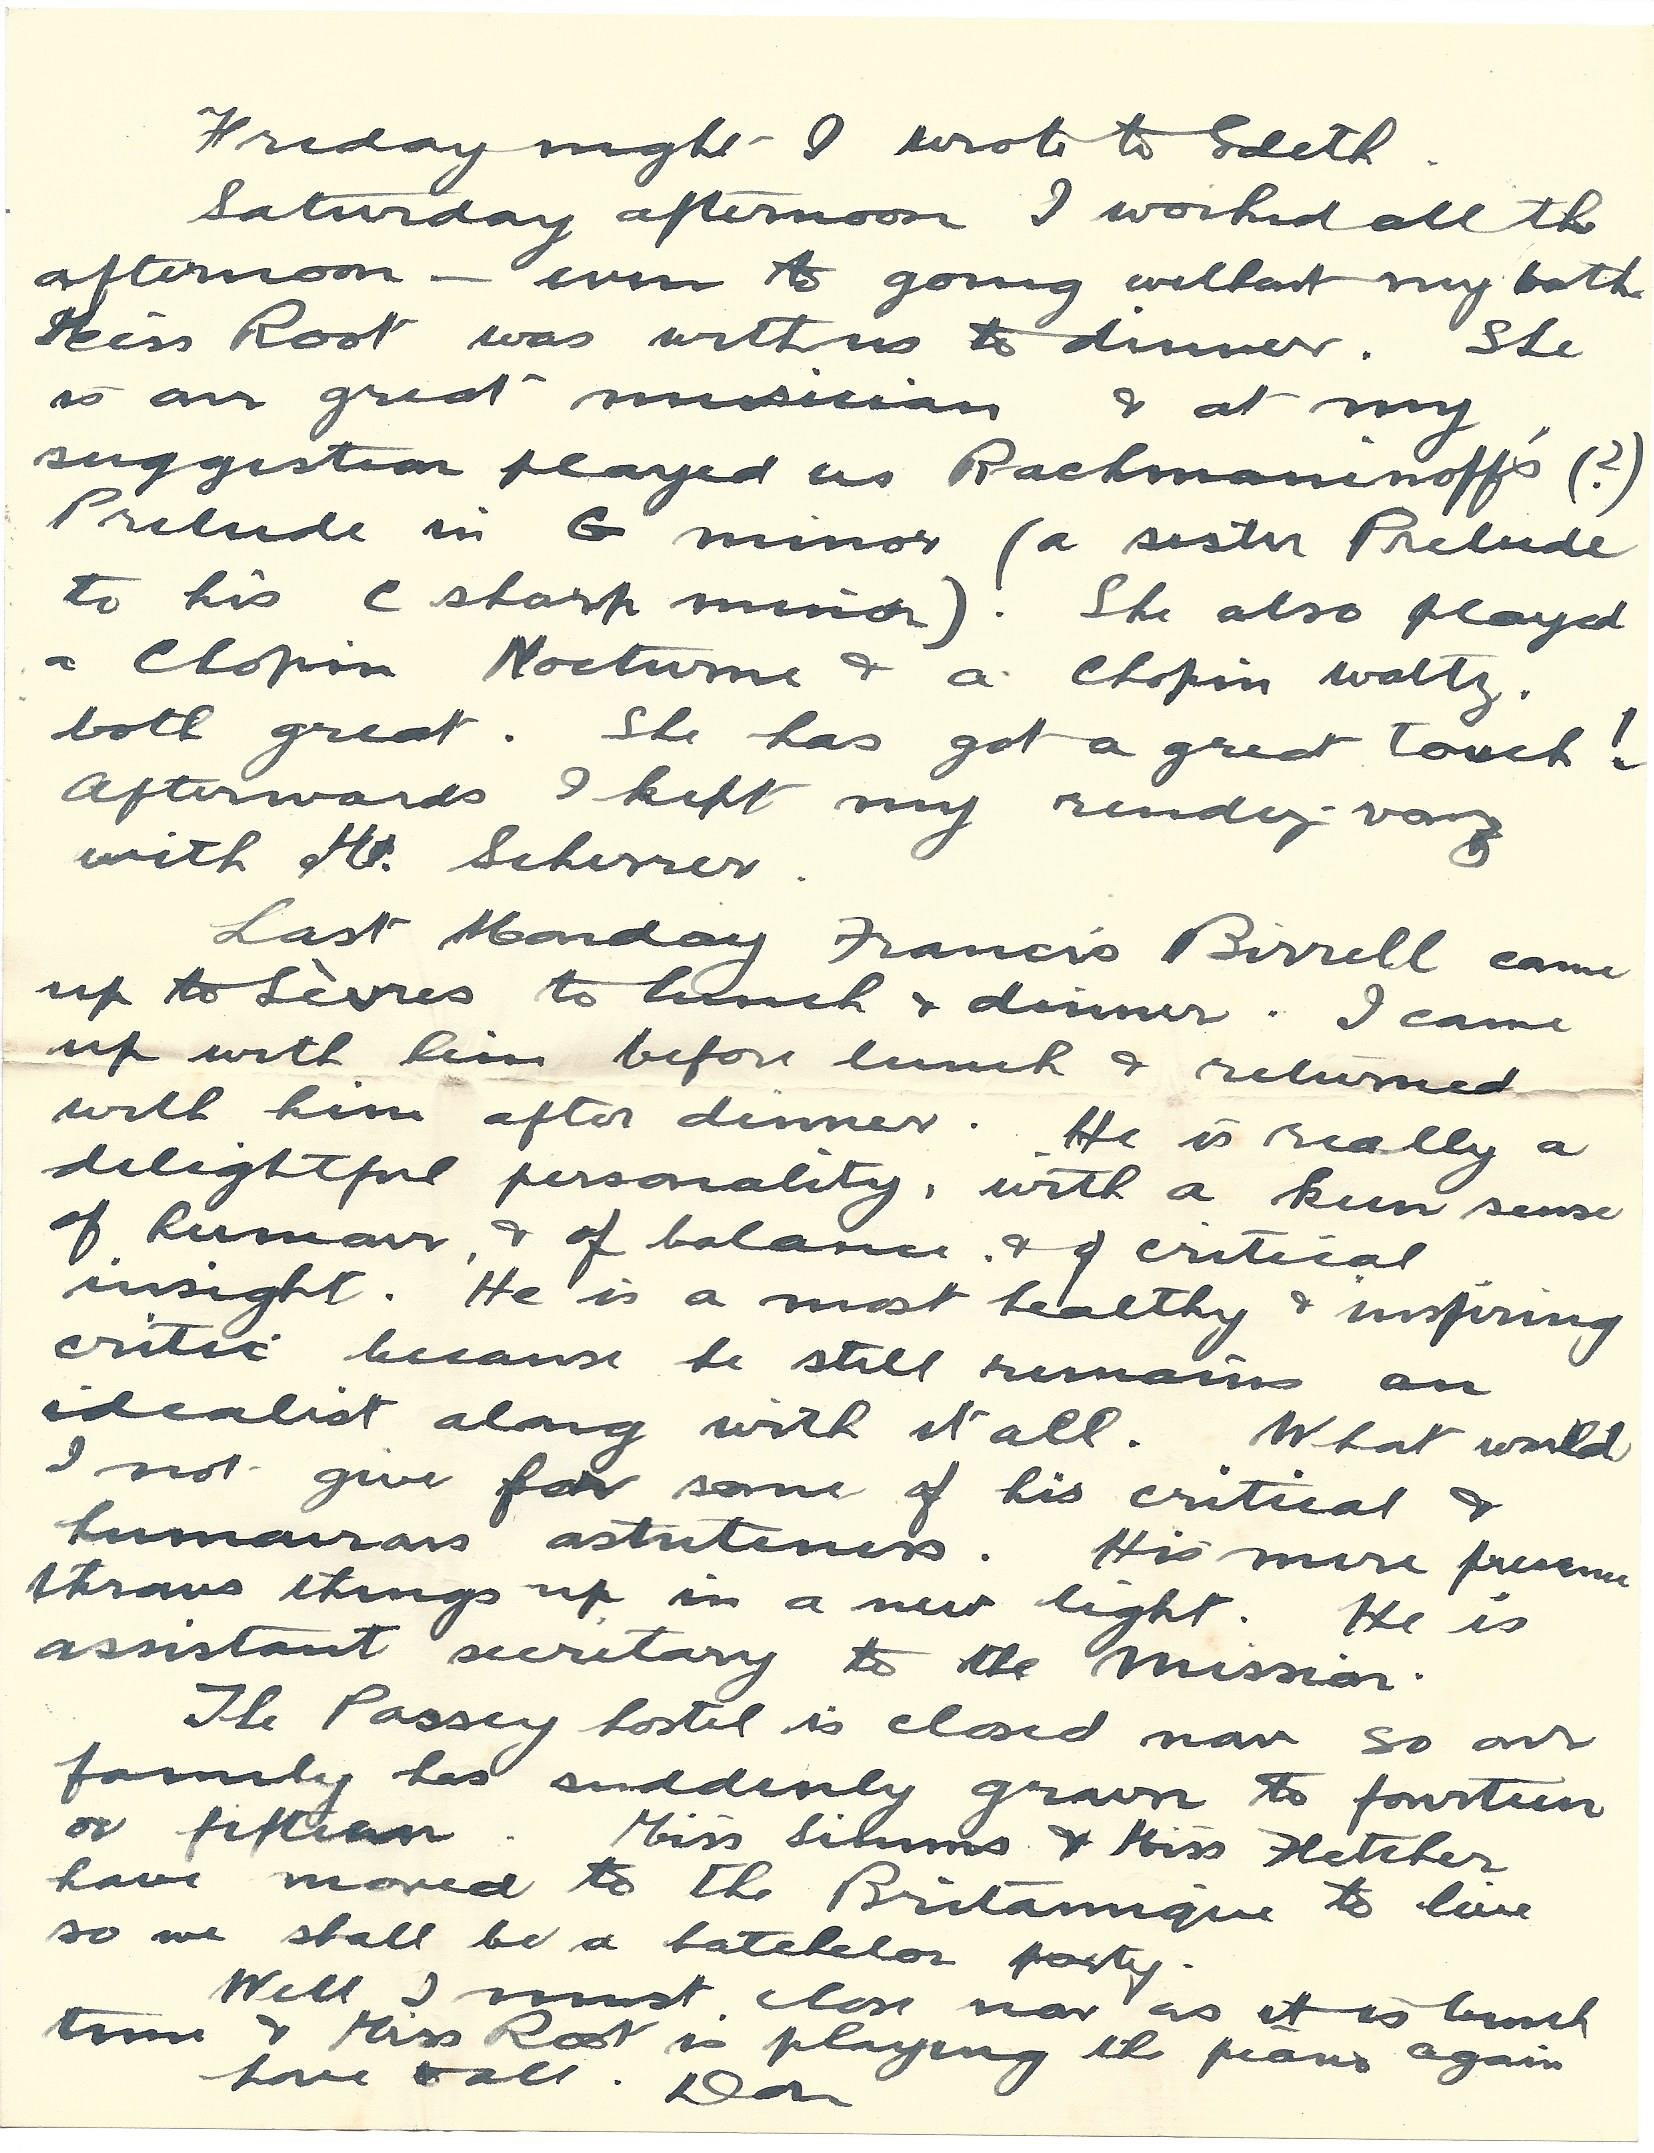 1919-10-19 Page 4 letter by Donald Bearman